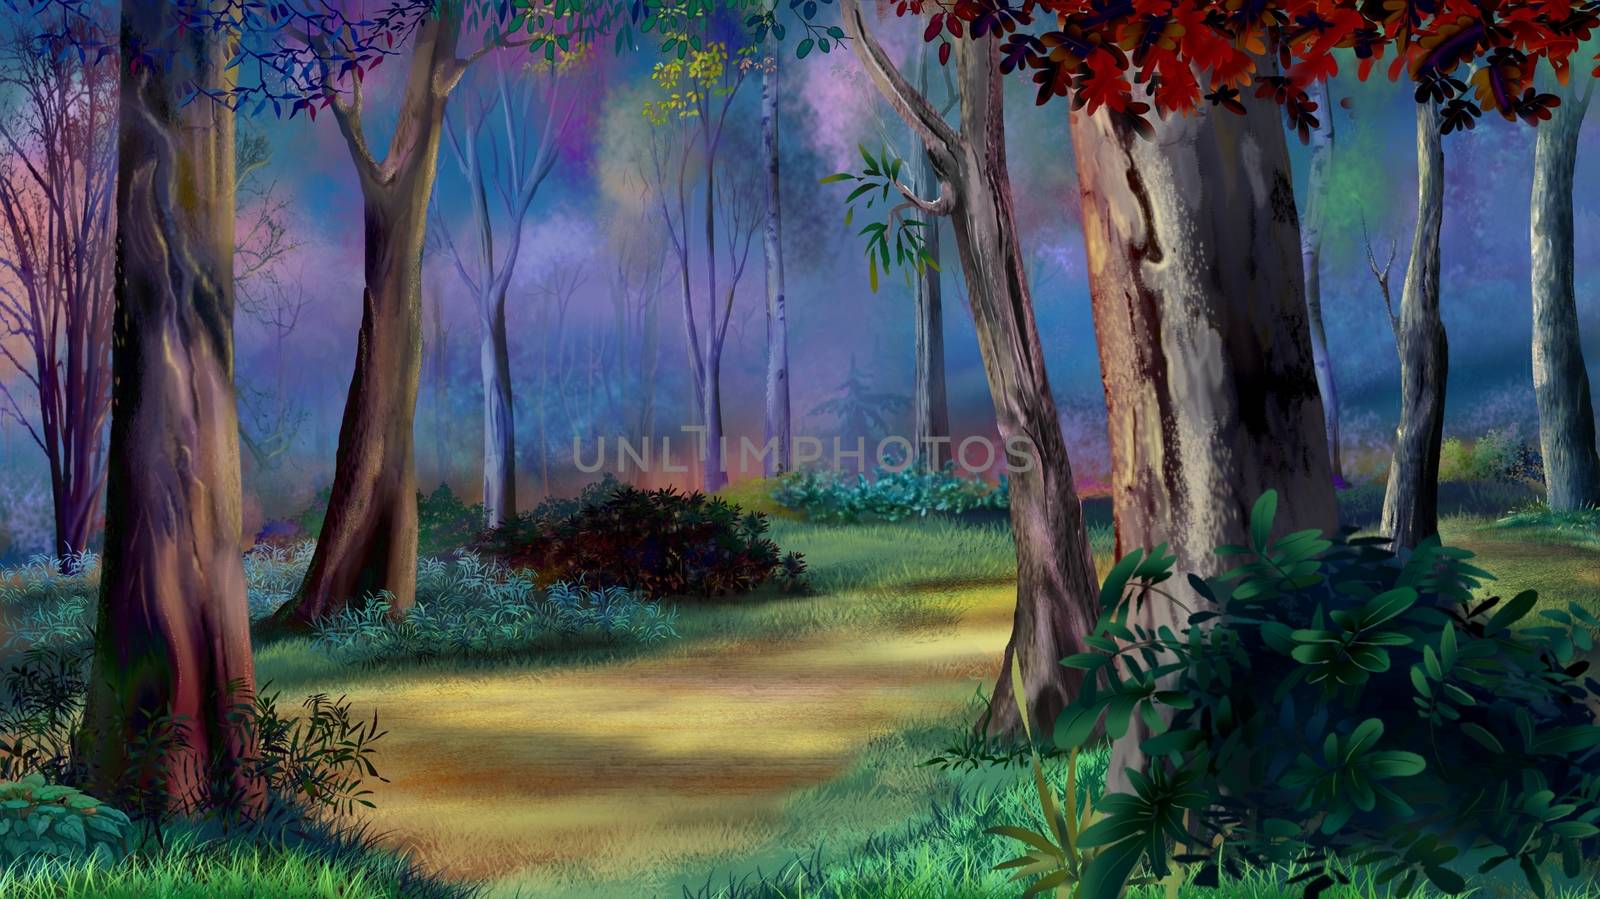 Digital painting of the Magic forest on sunset with path between trees